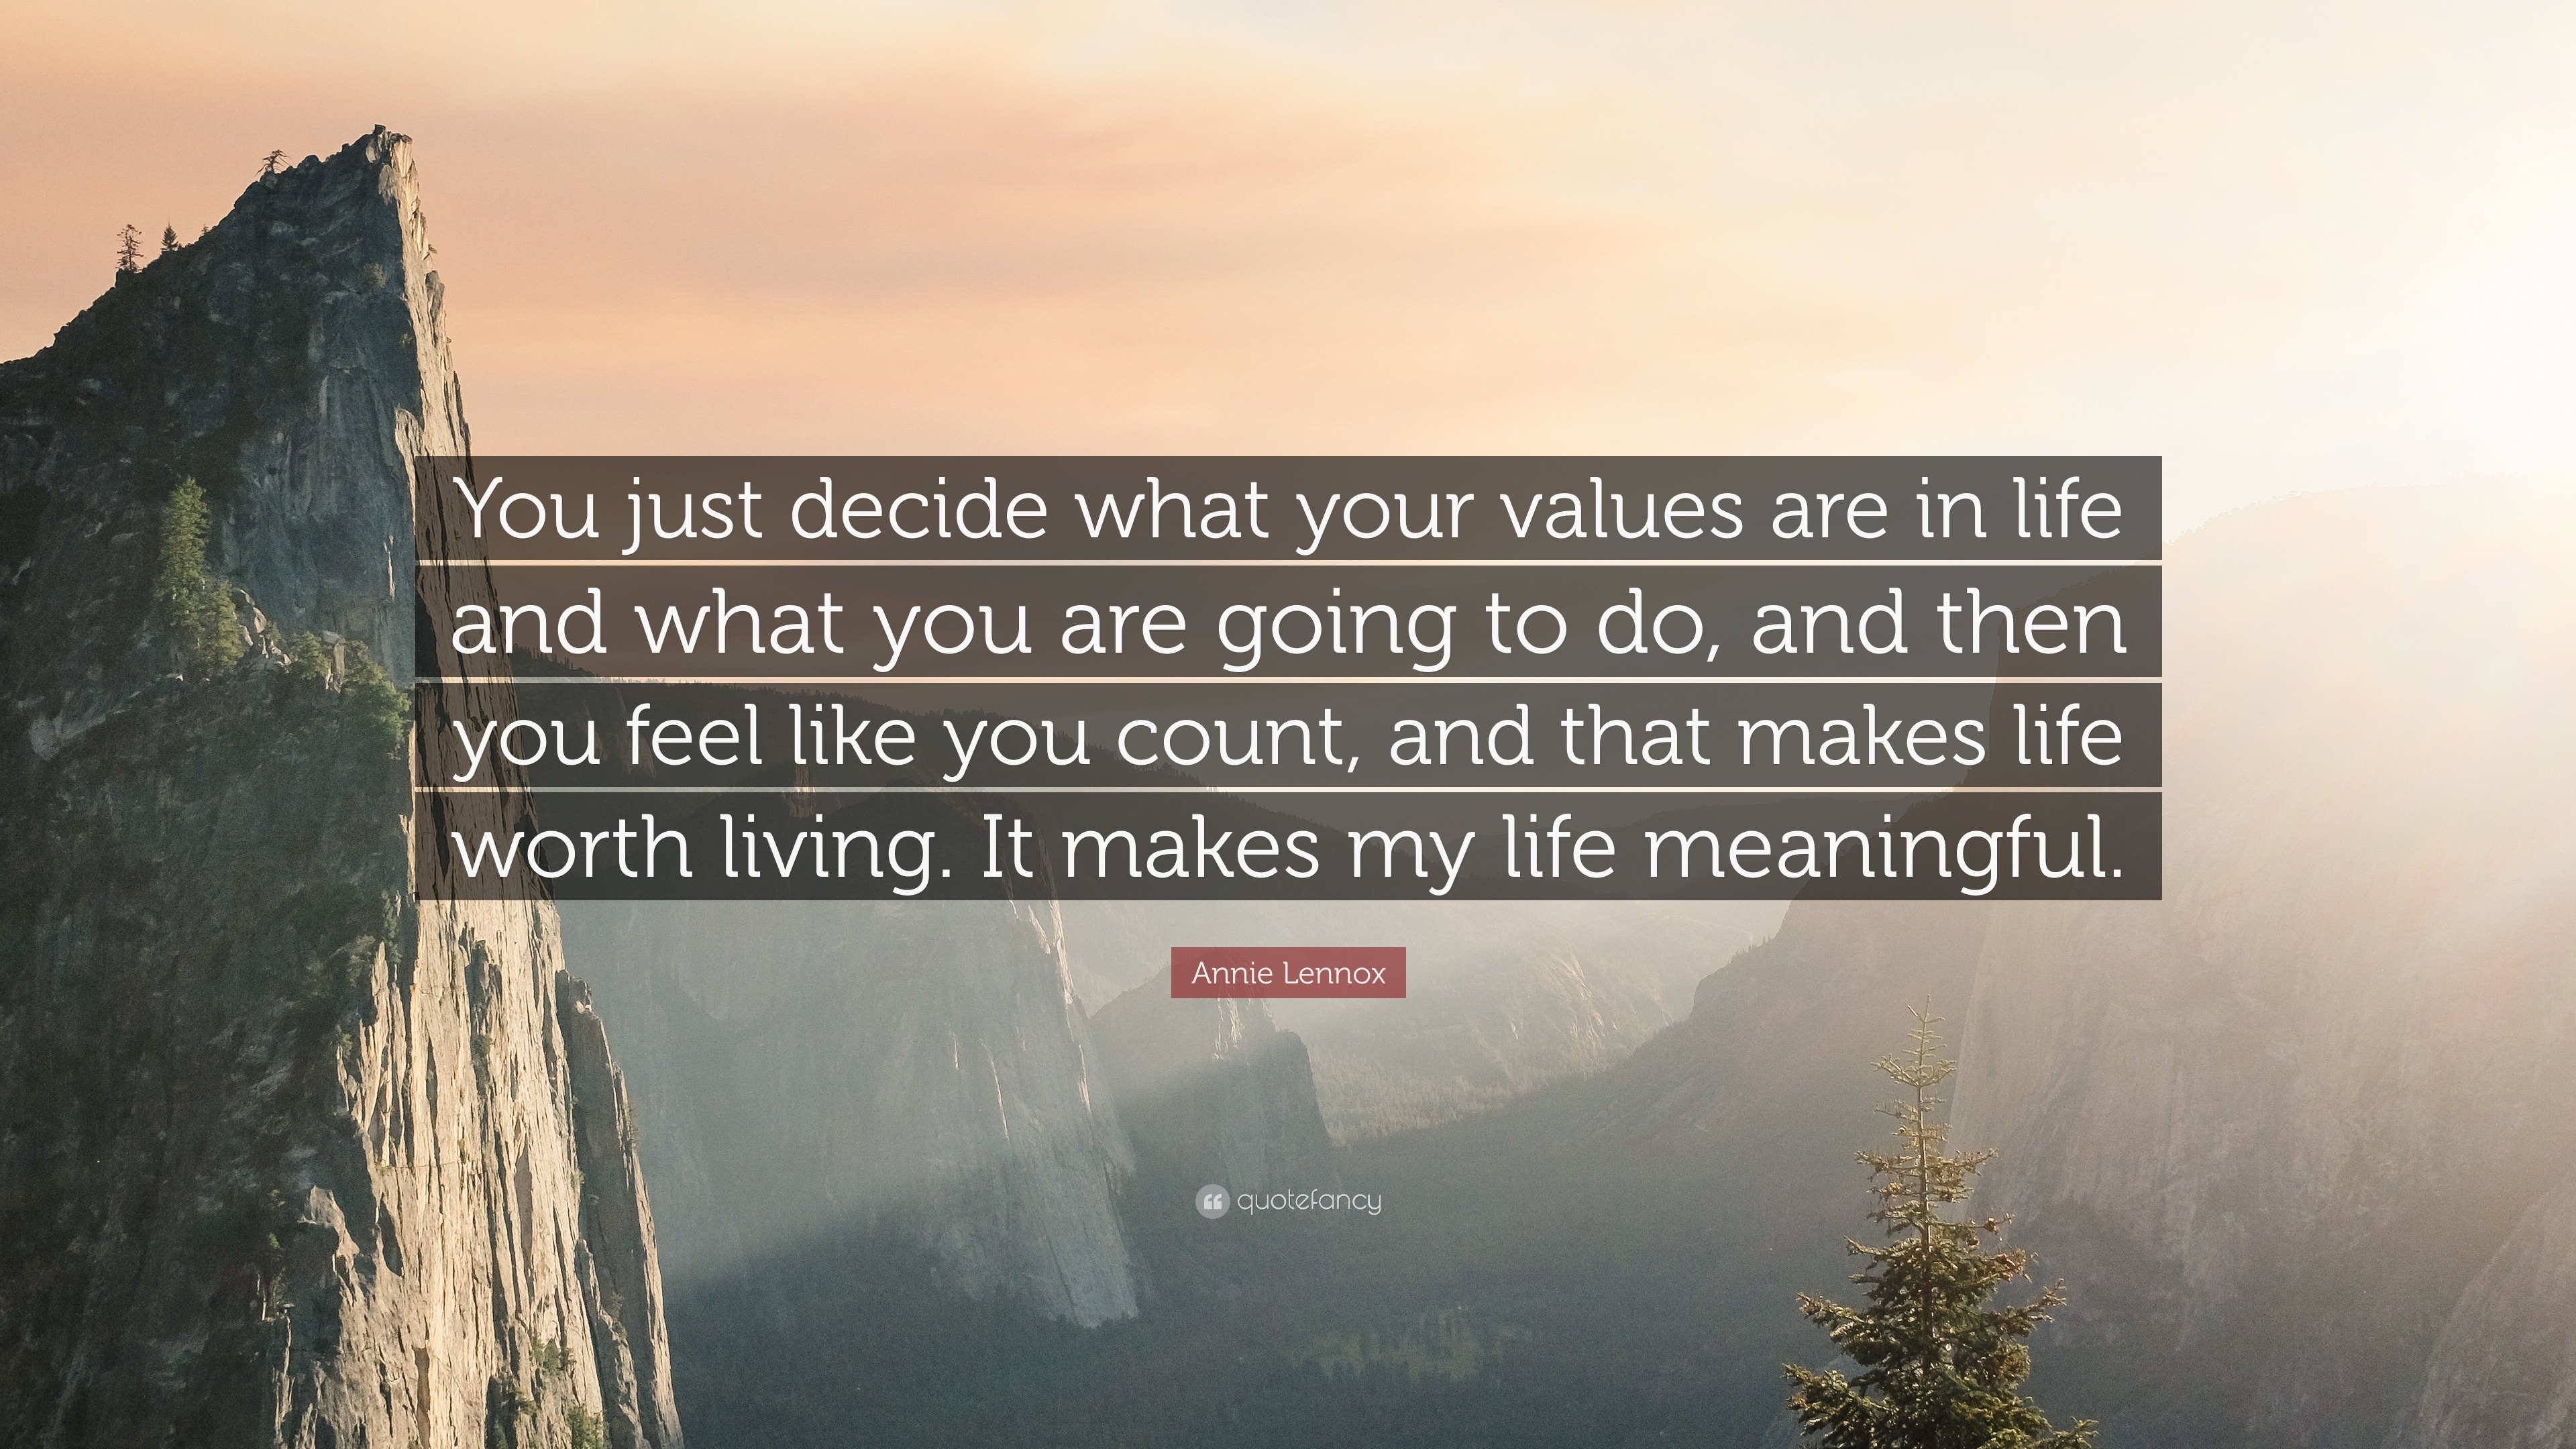 Meaning Life Quotes “You just decide what your values are in life and